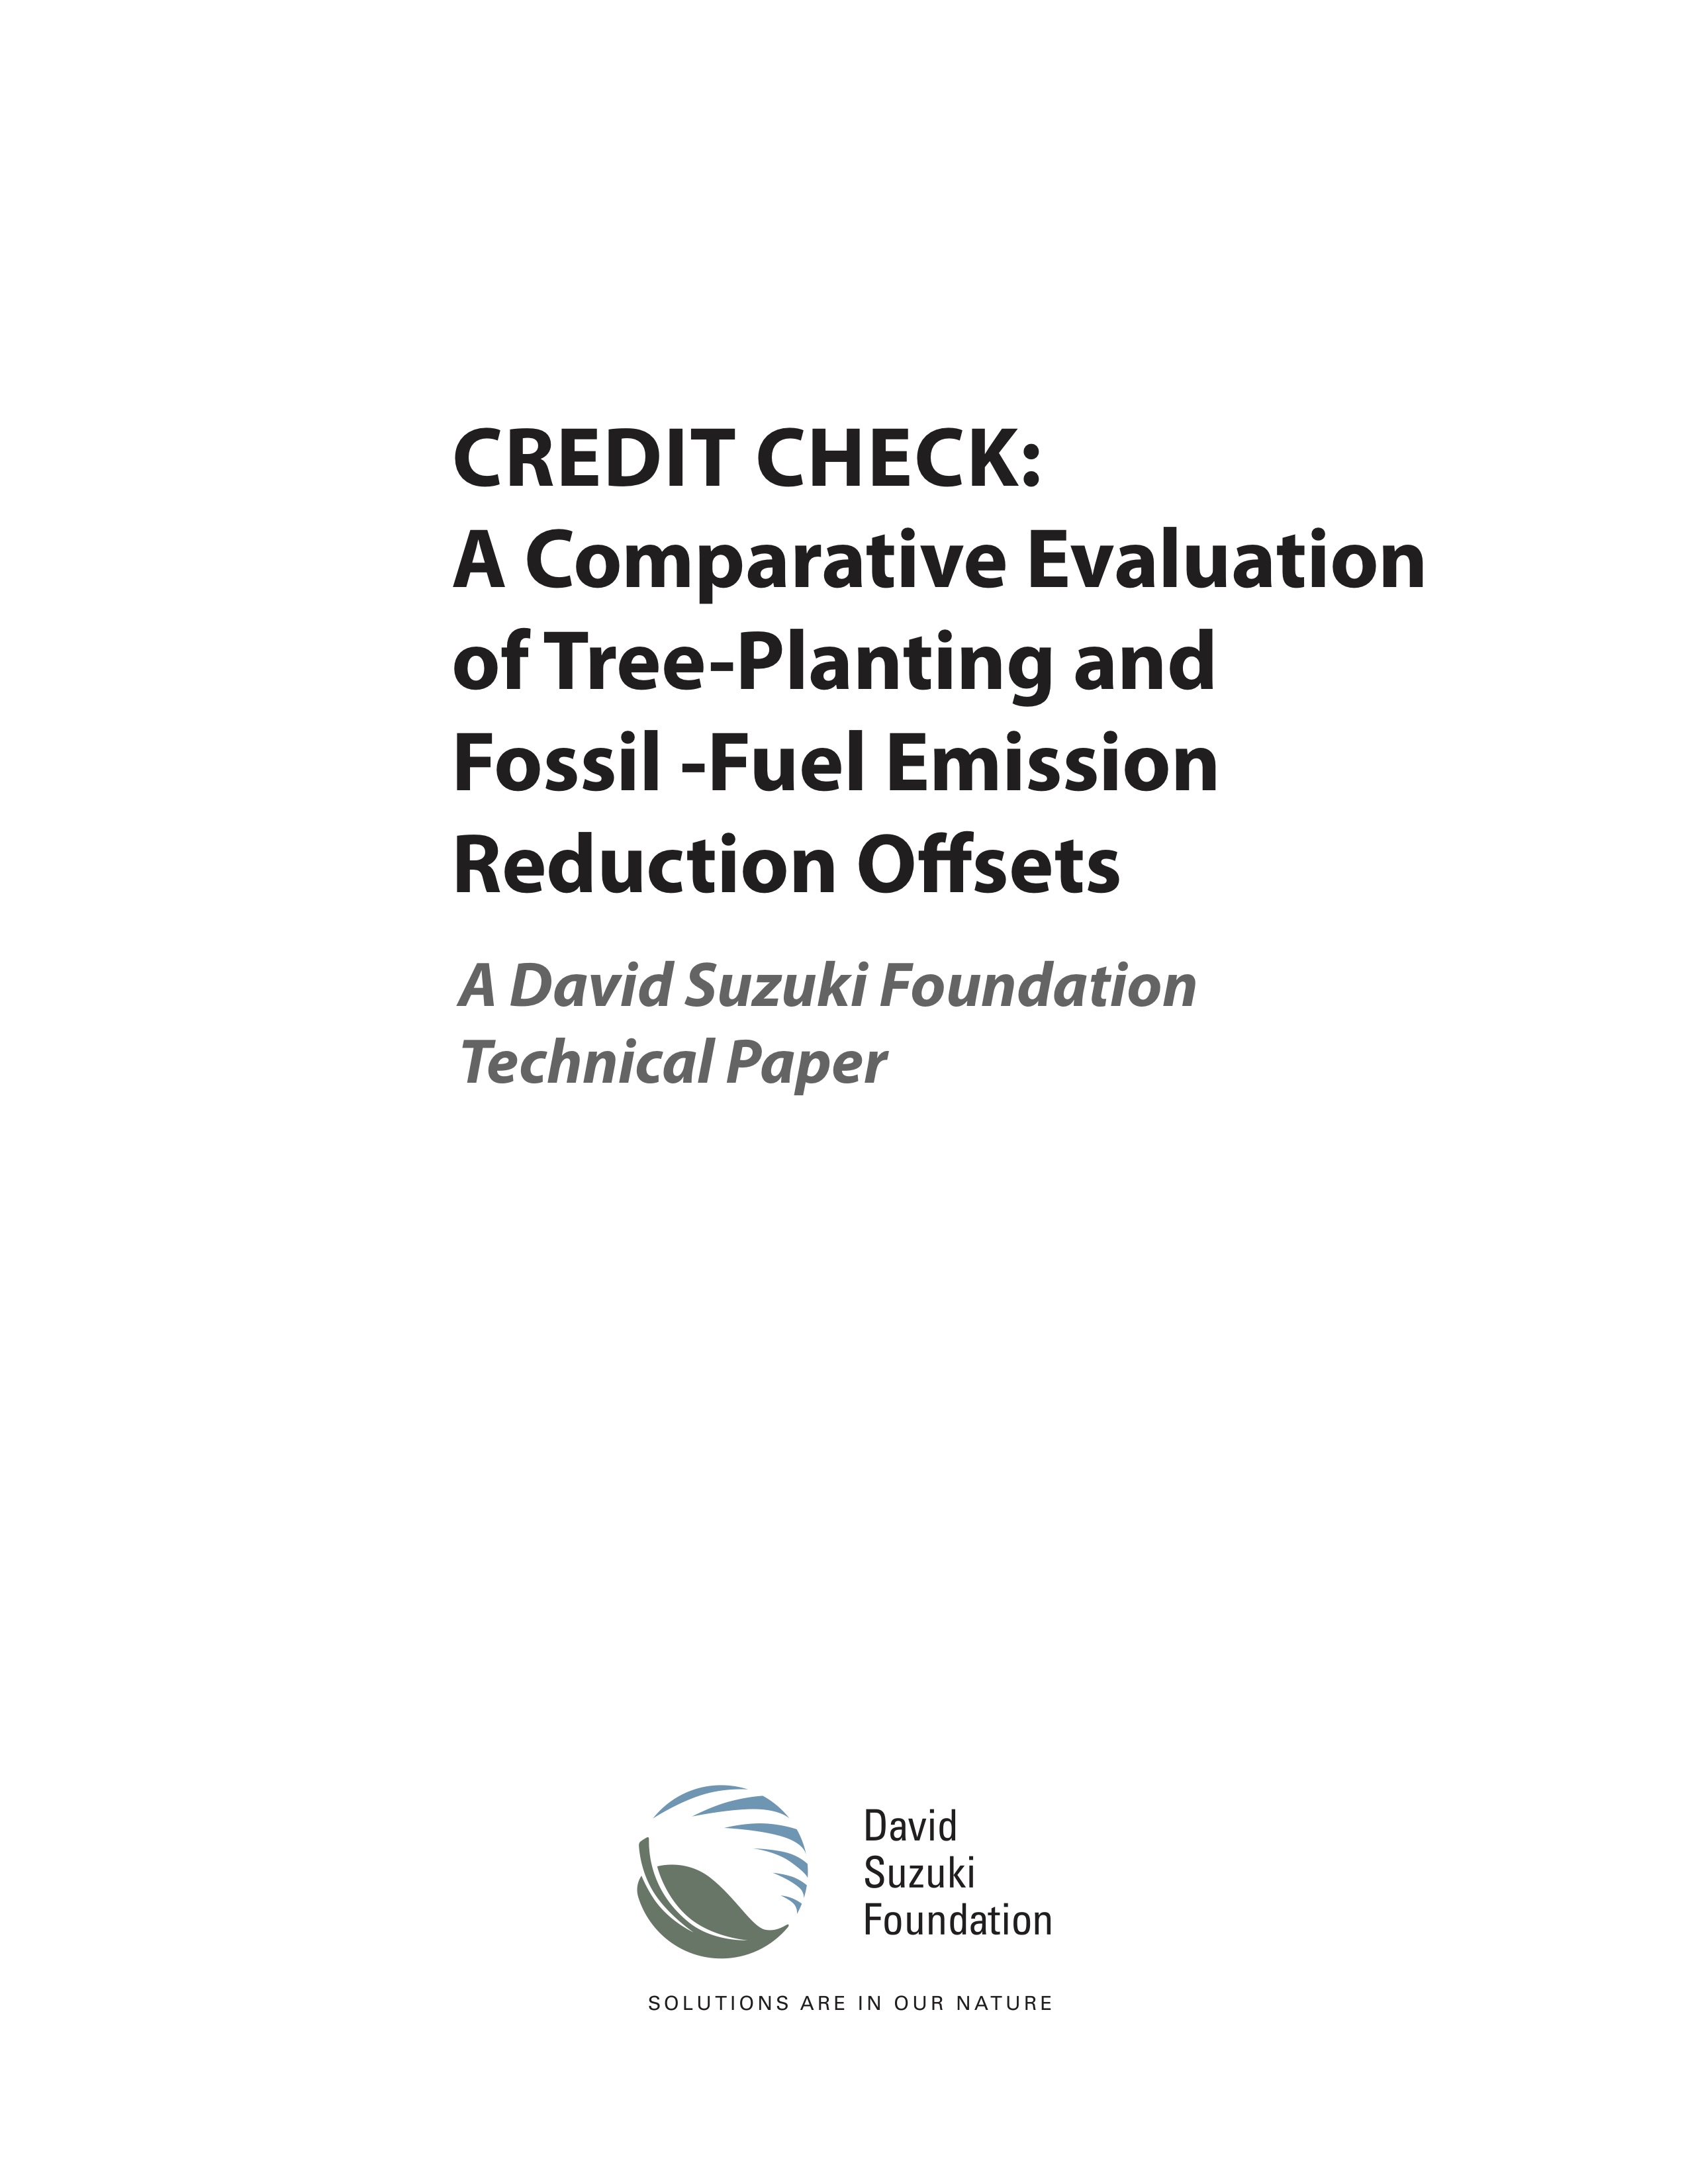 Credit Check: A Comparative Evaluation of Tree-Planting and Fossil-Fuel Emission Reduction Offsets